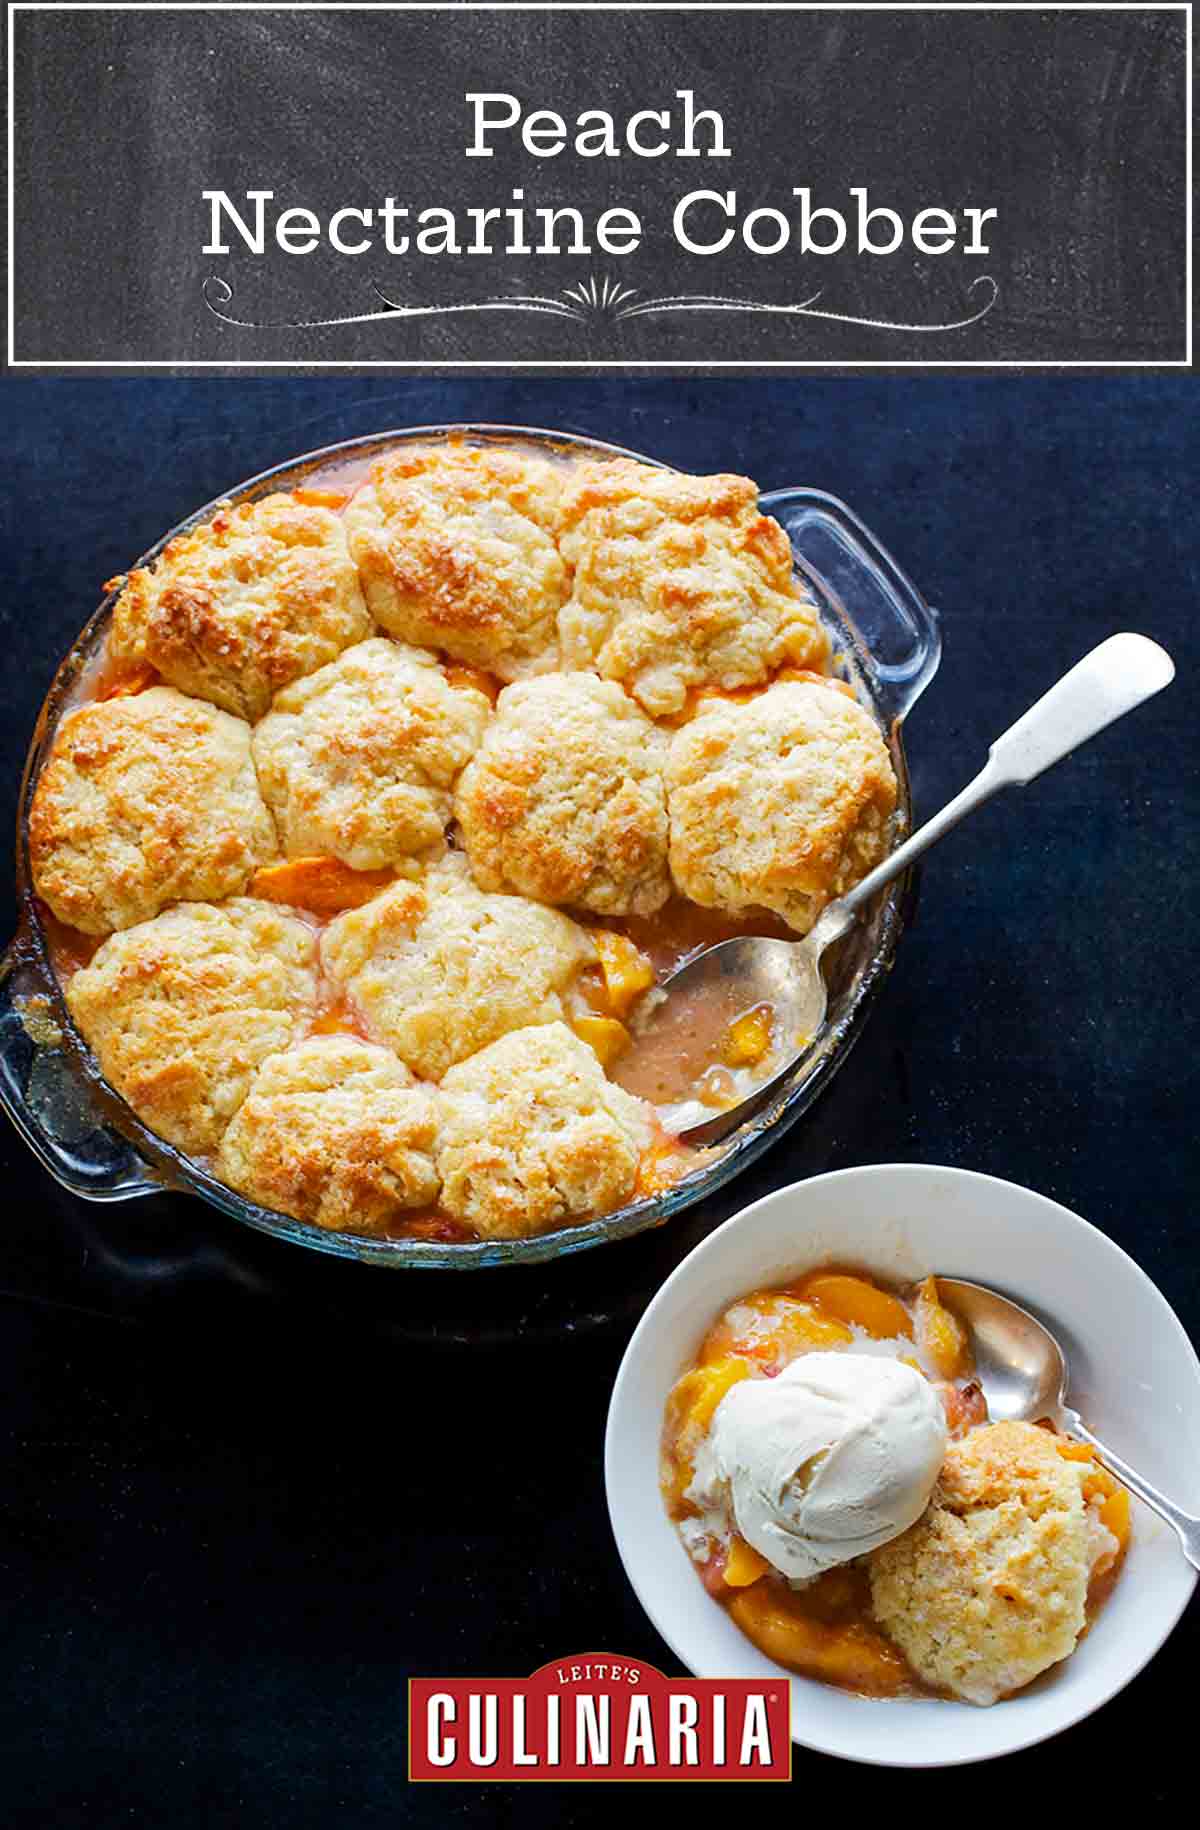 A glass baking dish filled with peach nectarine cobbler with a spoon resting inside and a bowl of cobbler with ice cream on the side.